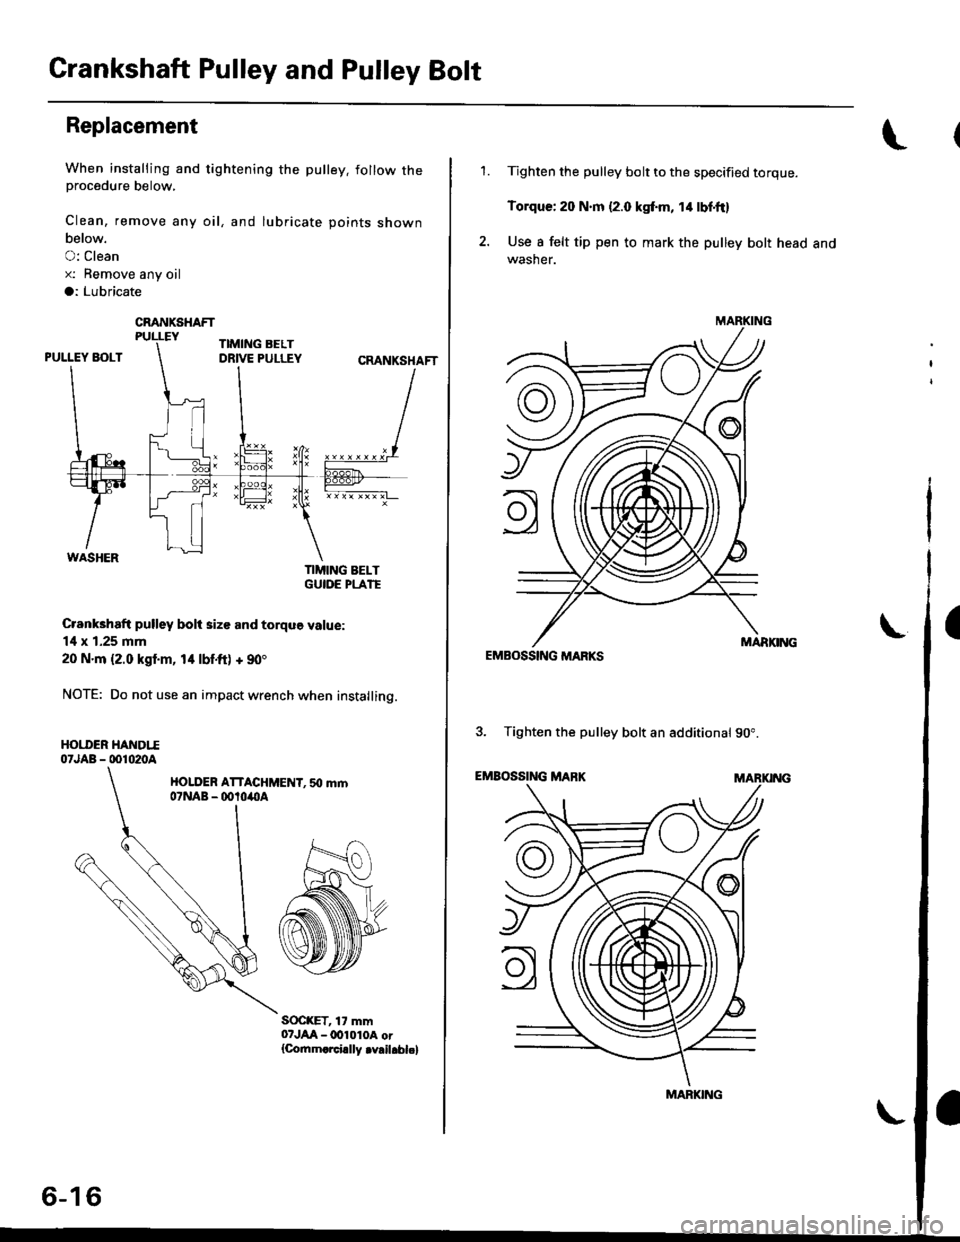 HONDA CIVIC 1996 6.G Workshop Manual Crankshaft Pulley and Pulley Bolt
Replacement
When installing and tightening the pulley. follow theprocedure below,
Clean, remove any oil, and lubricate points shown
below.
O: Clean
x: Bemove any oil
